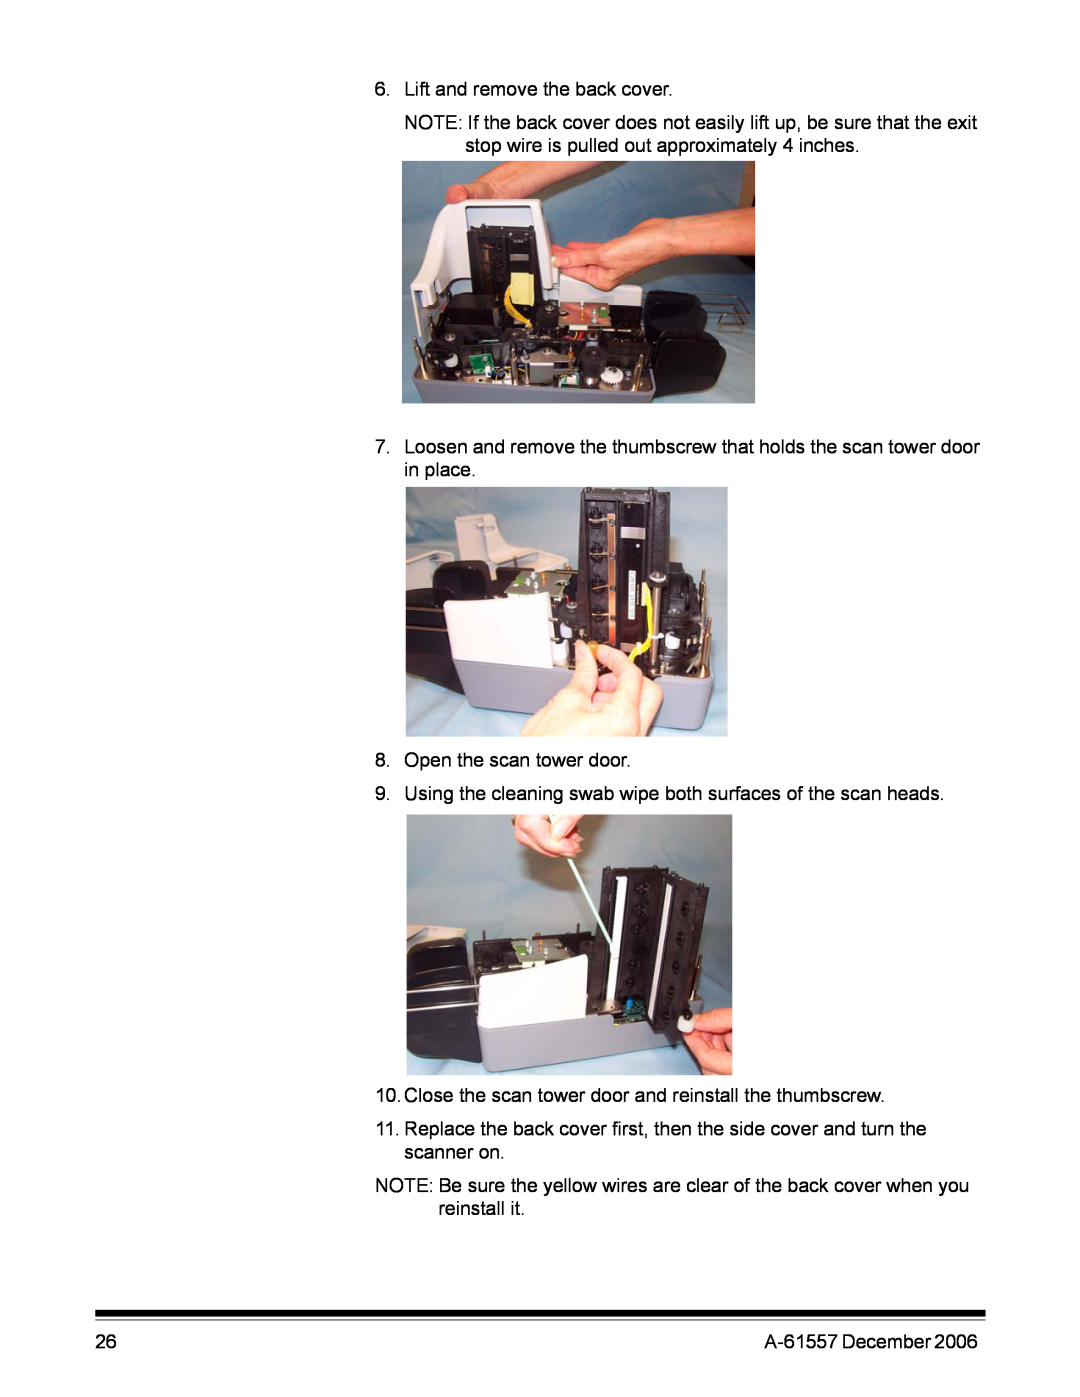 Kodak A-61557 manual Lift and remove the back cover 